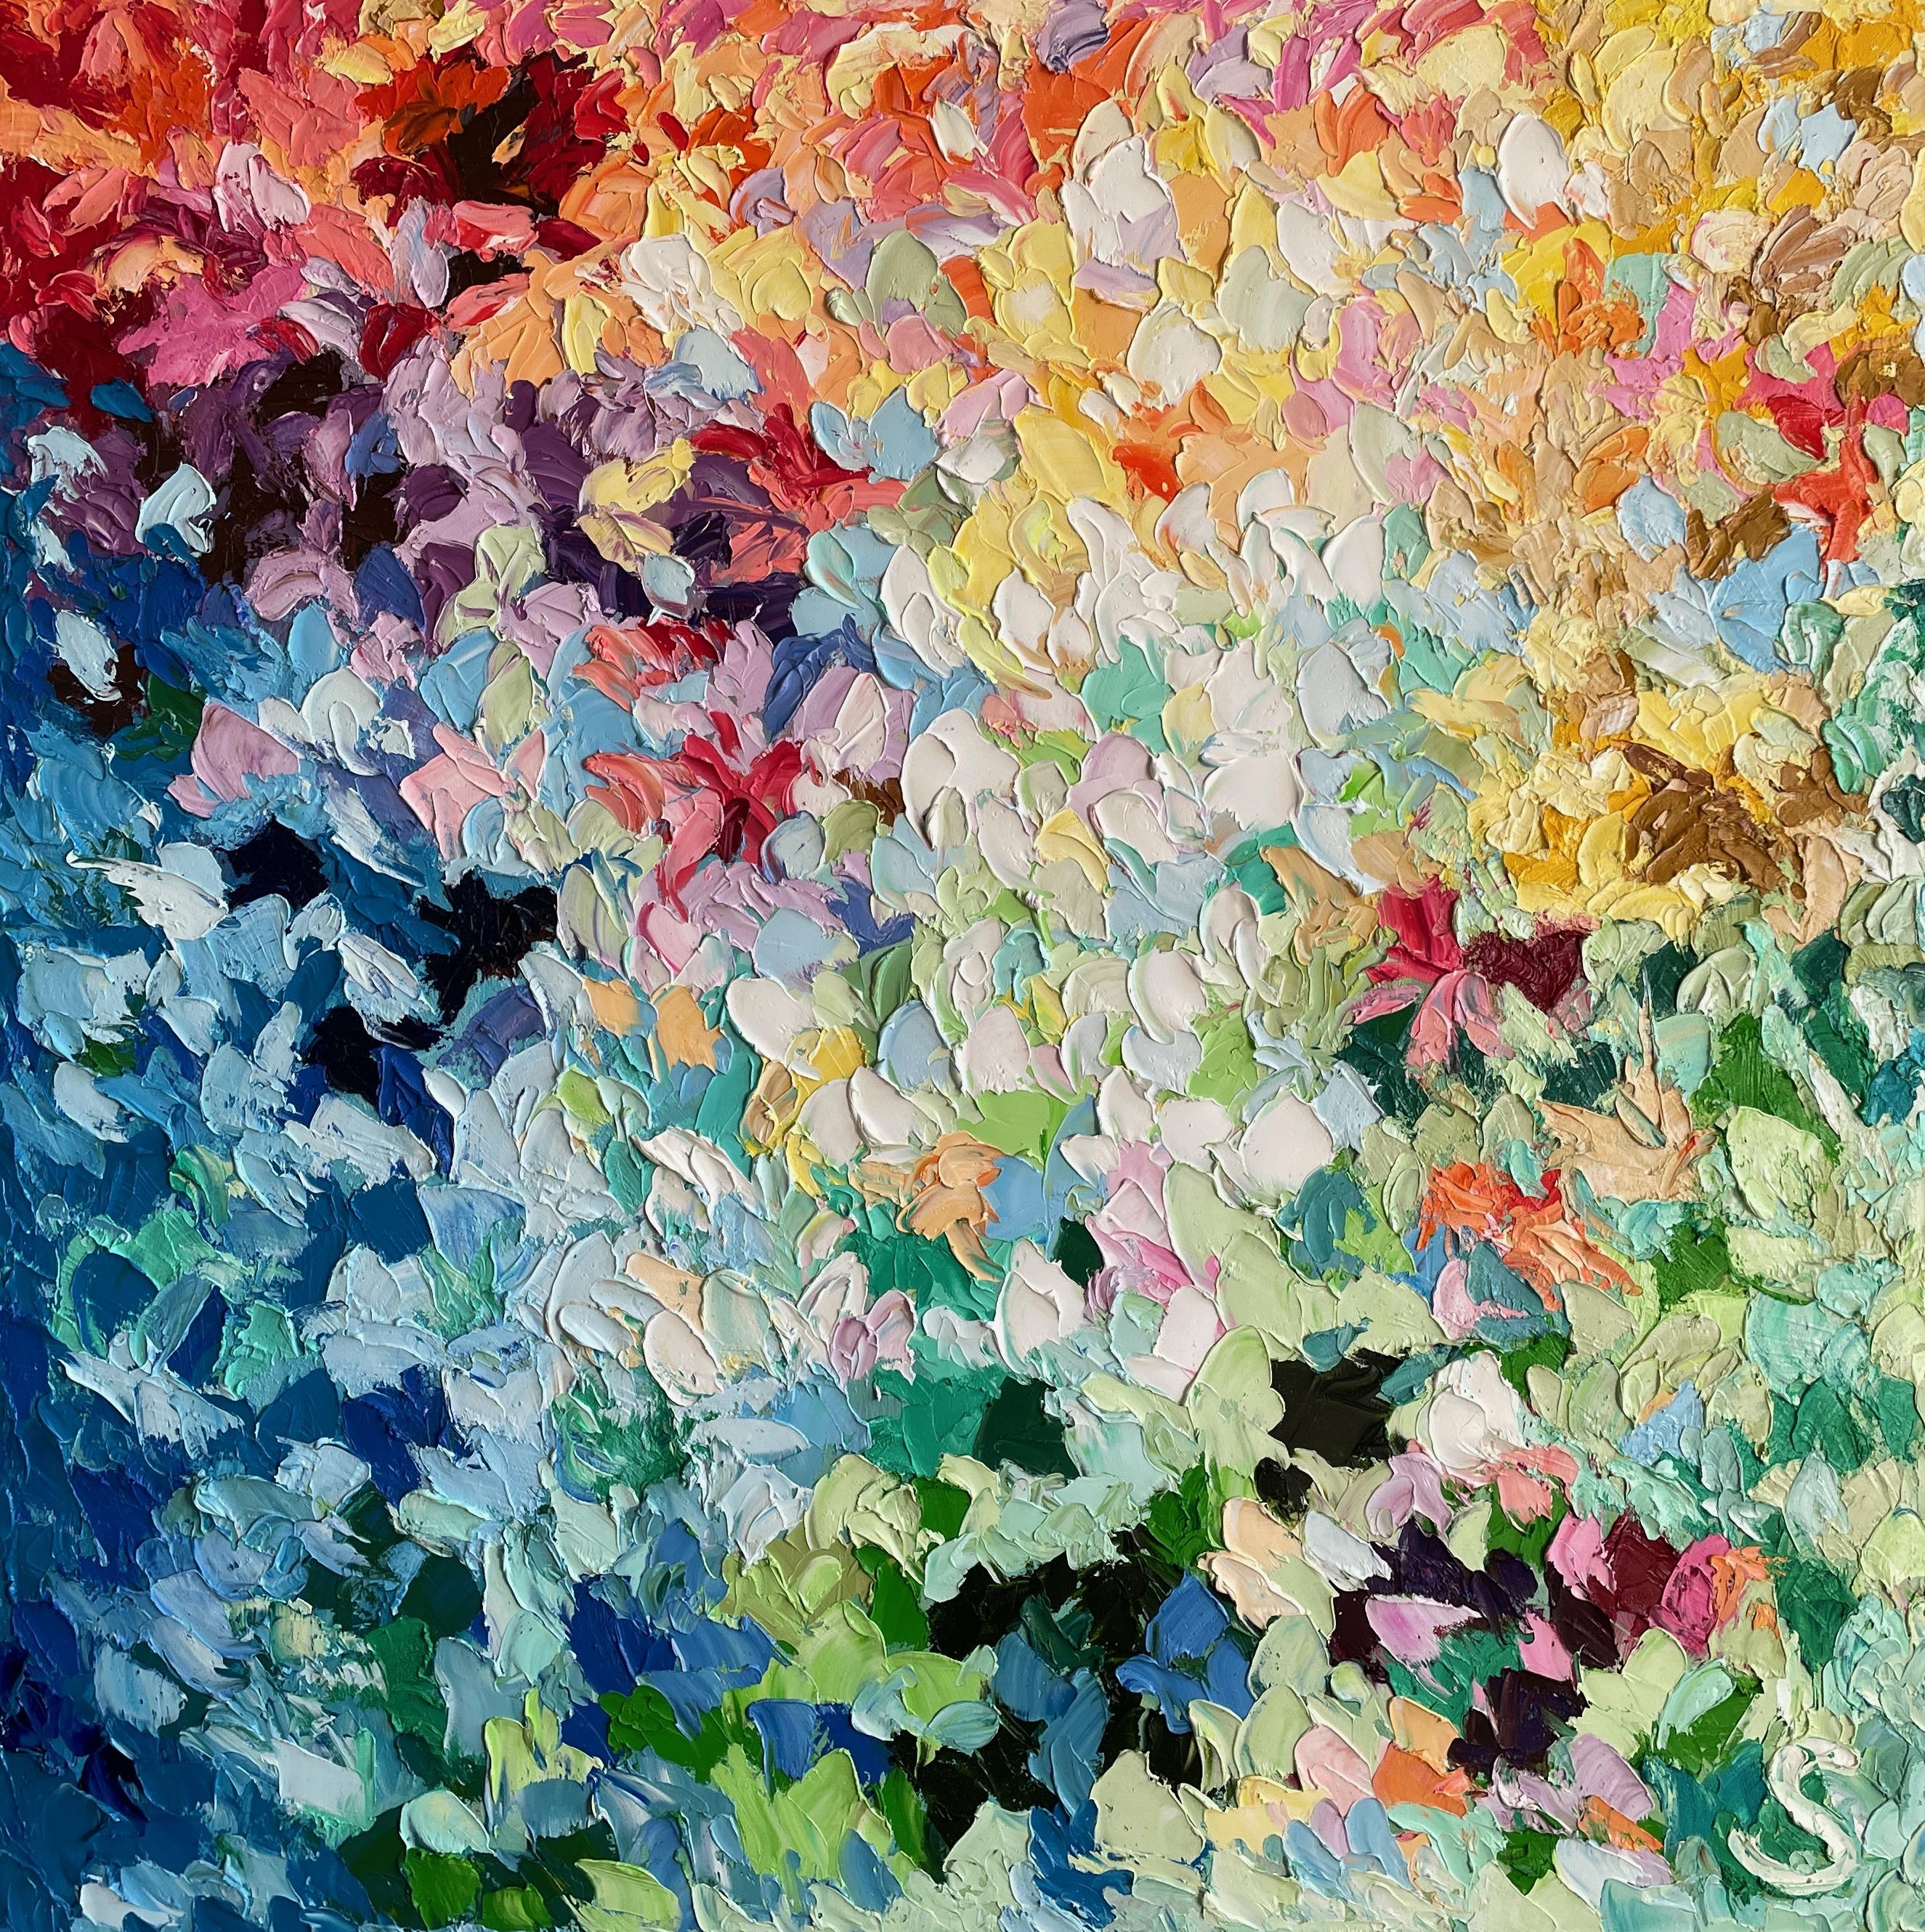 "Childhood Memories" by Sveta Hessler is a vibrant 40" x 40" oil on canvas painting that bursts with color, emotion, and nostalgia. The painting pulsates with rich hues—whimsical pinks, deep purples, serene blues, and sun-kissed yellows—that